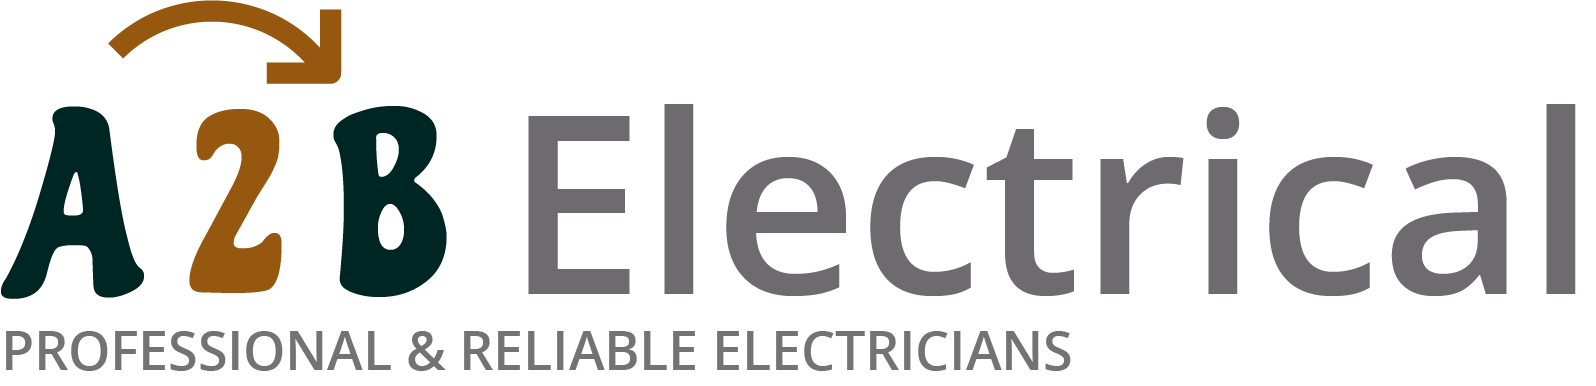 If you have electrical wiring problems in Chichester, we can provide an electrician to have a look for you. 